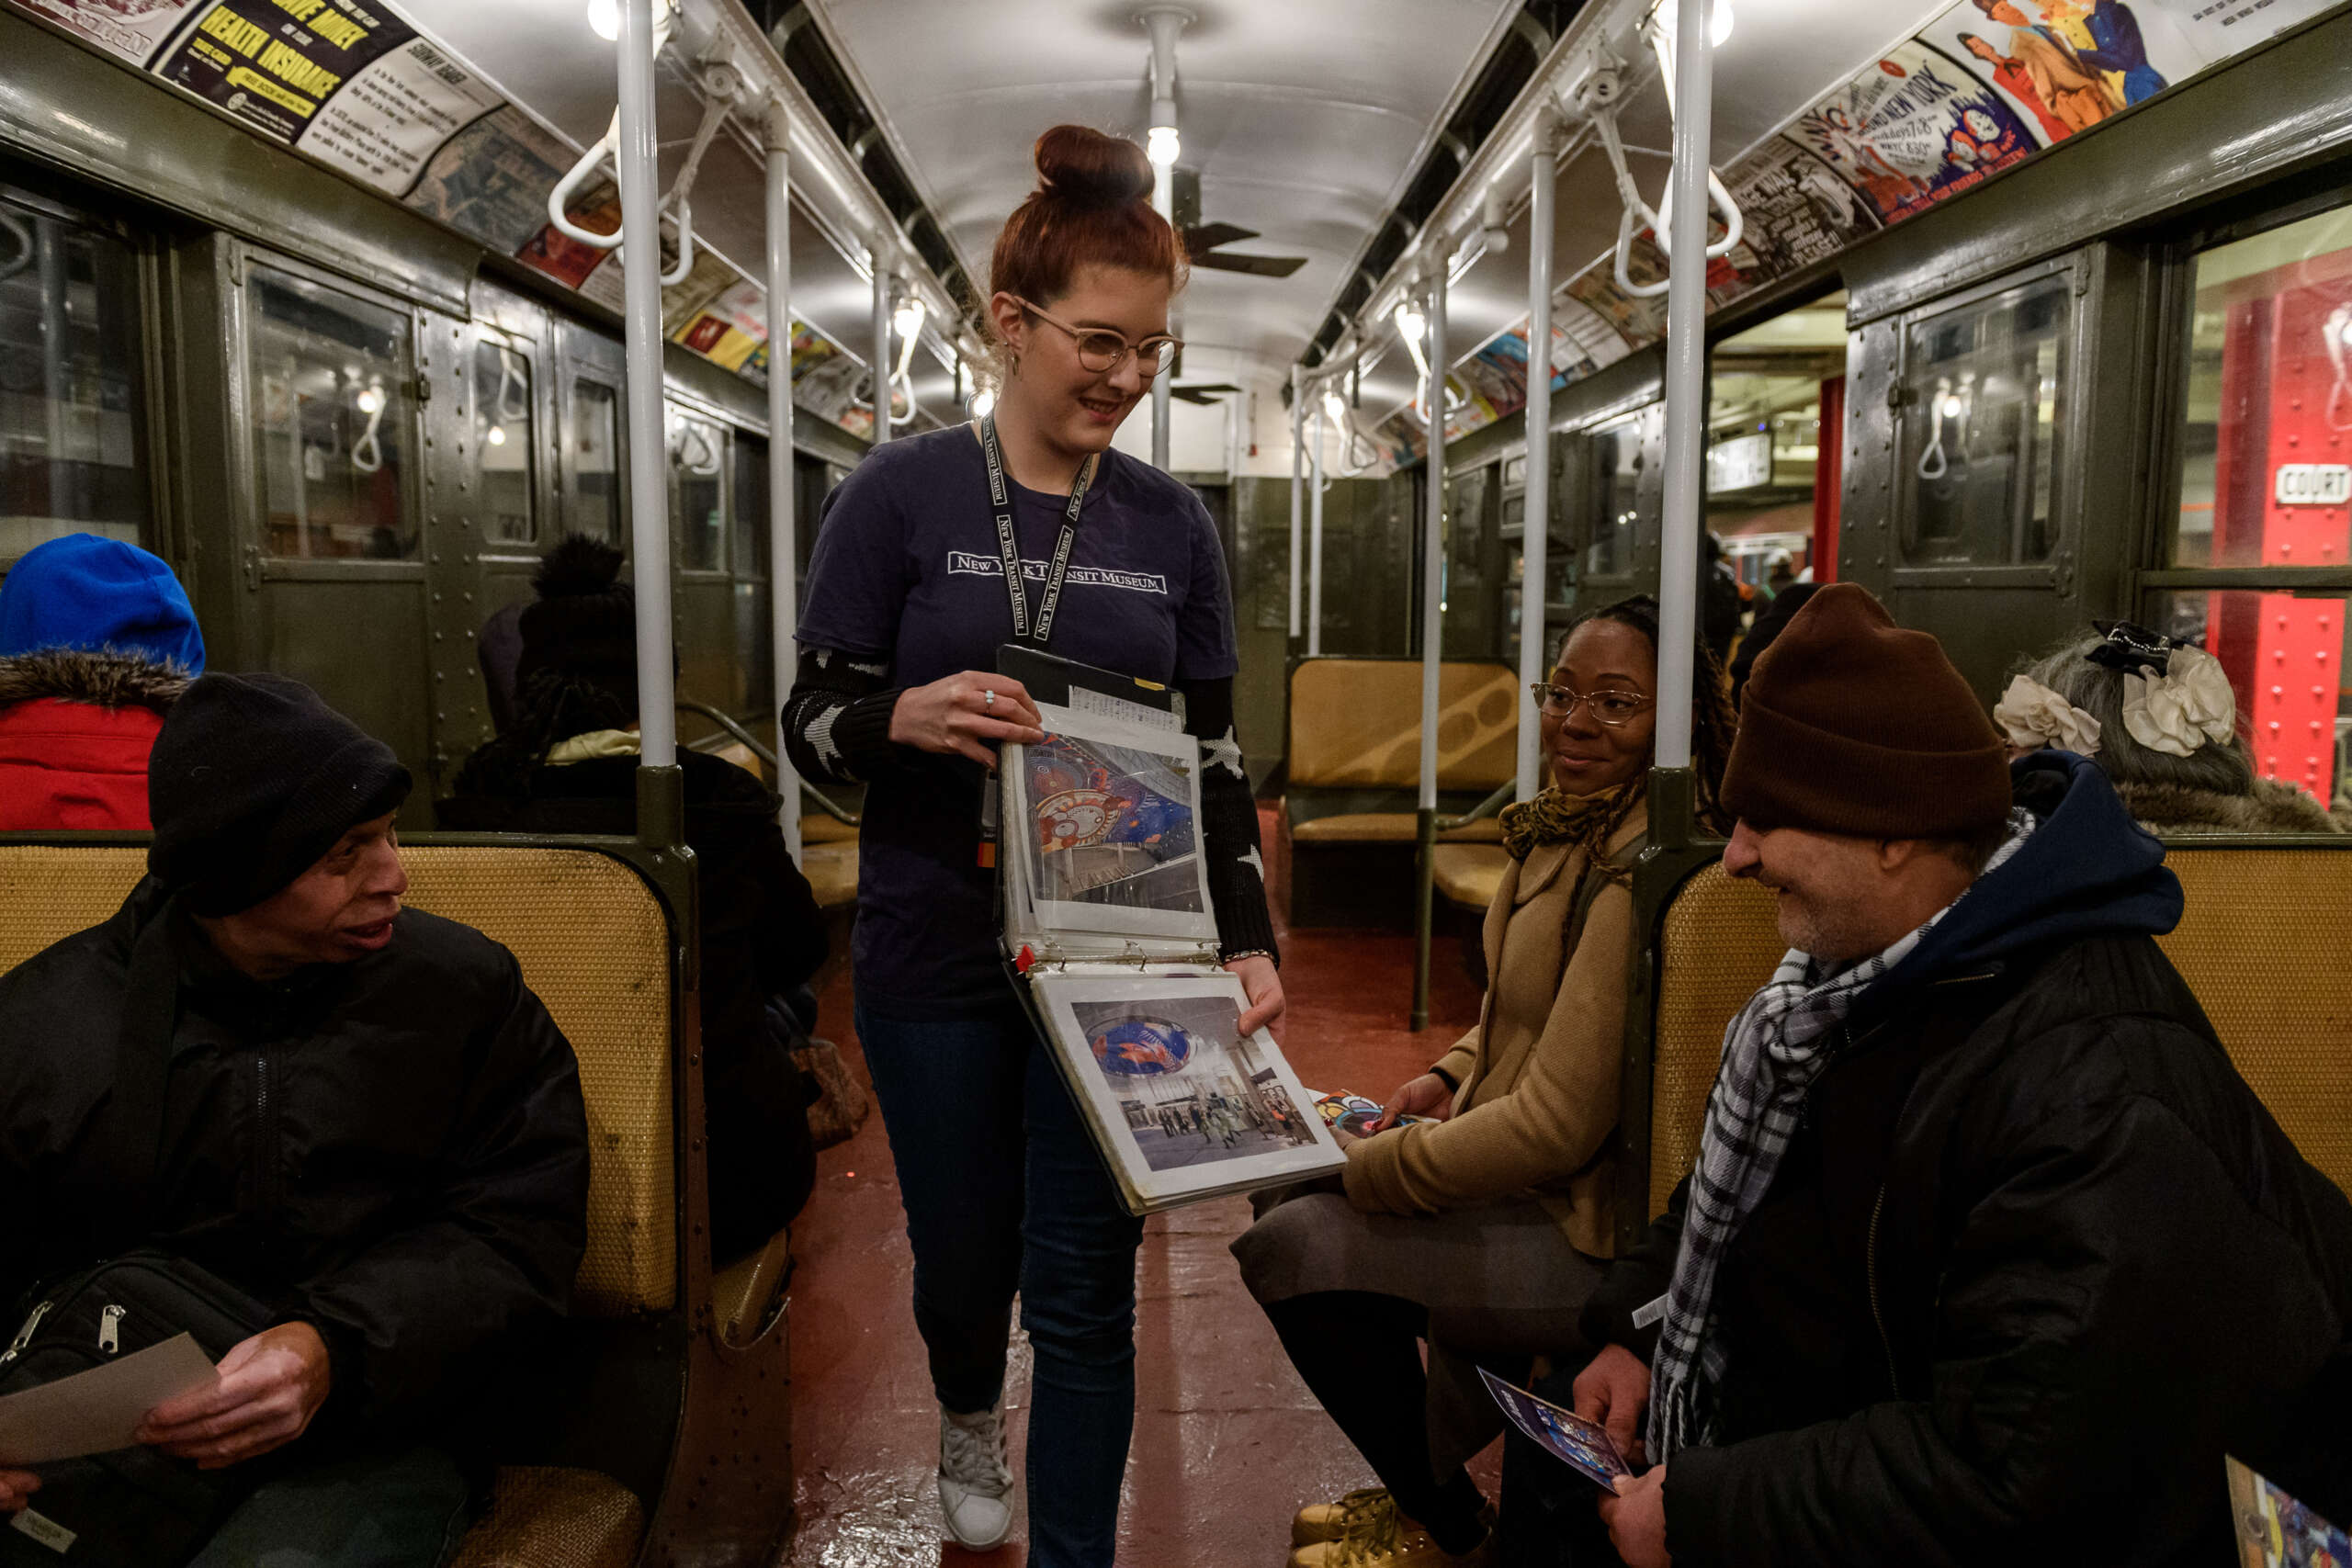 A Museum Educator shows images to visitors on a vintage subway car.